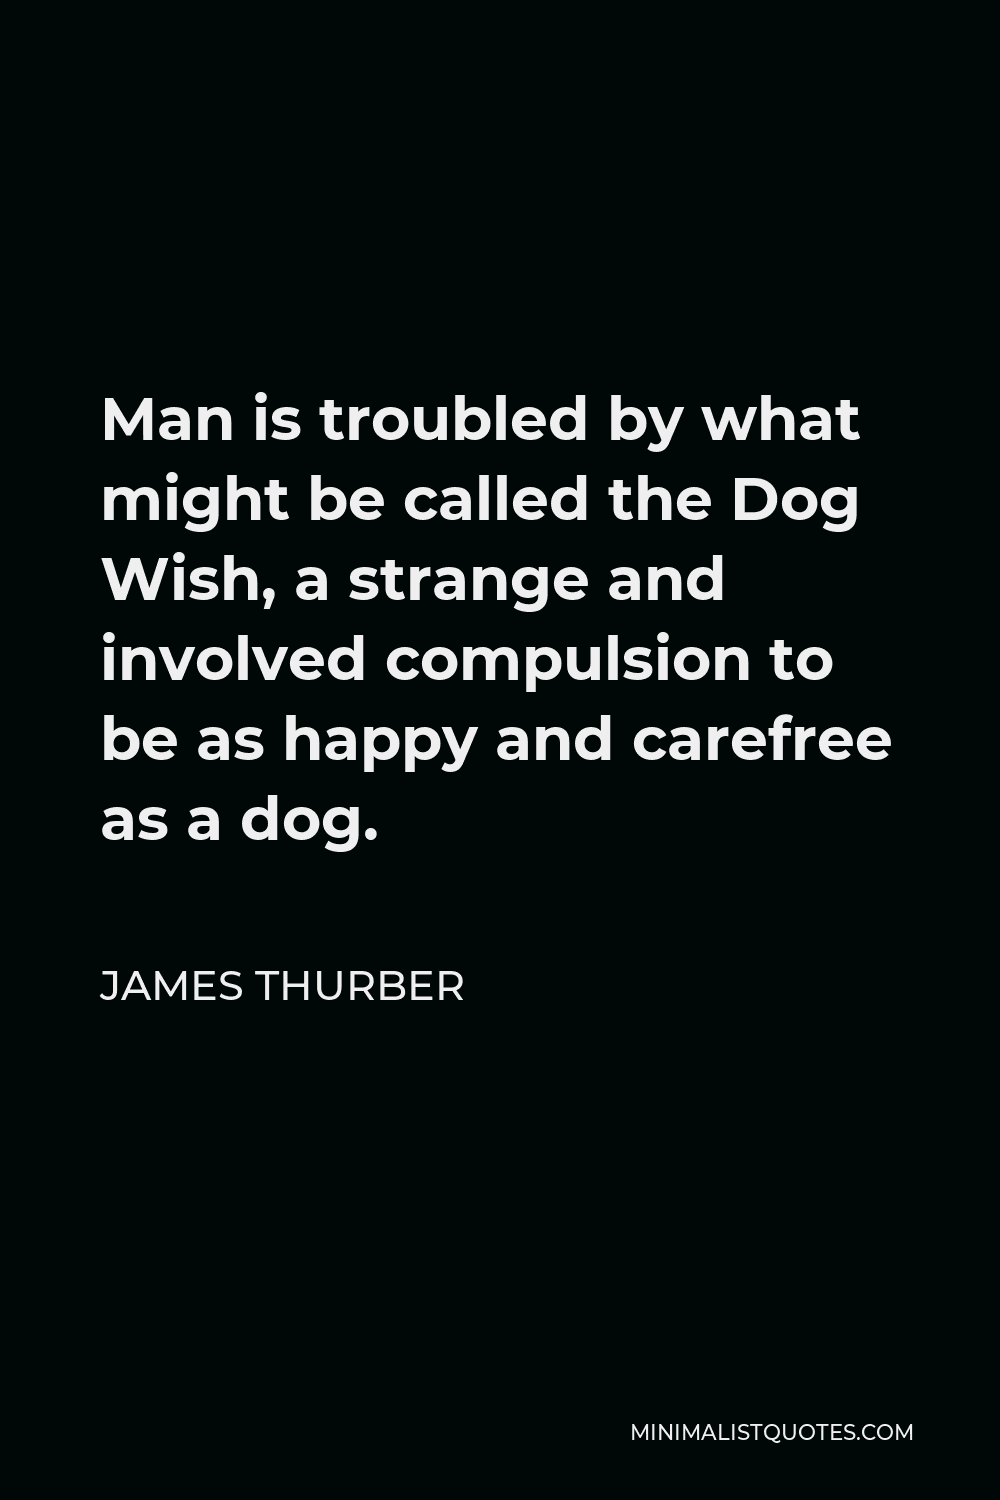 James Thurber Quote - Man is troubled by what might be called the Dog Wish, a strange and involved compulsion to be as happy and carefree as a dog.